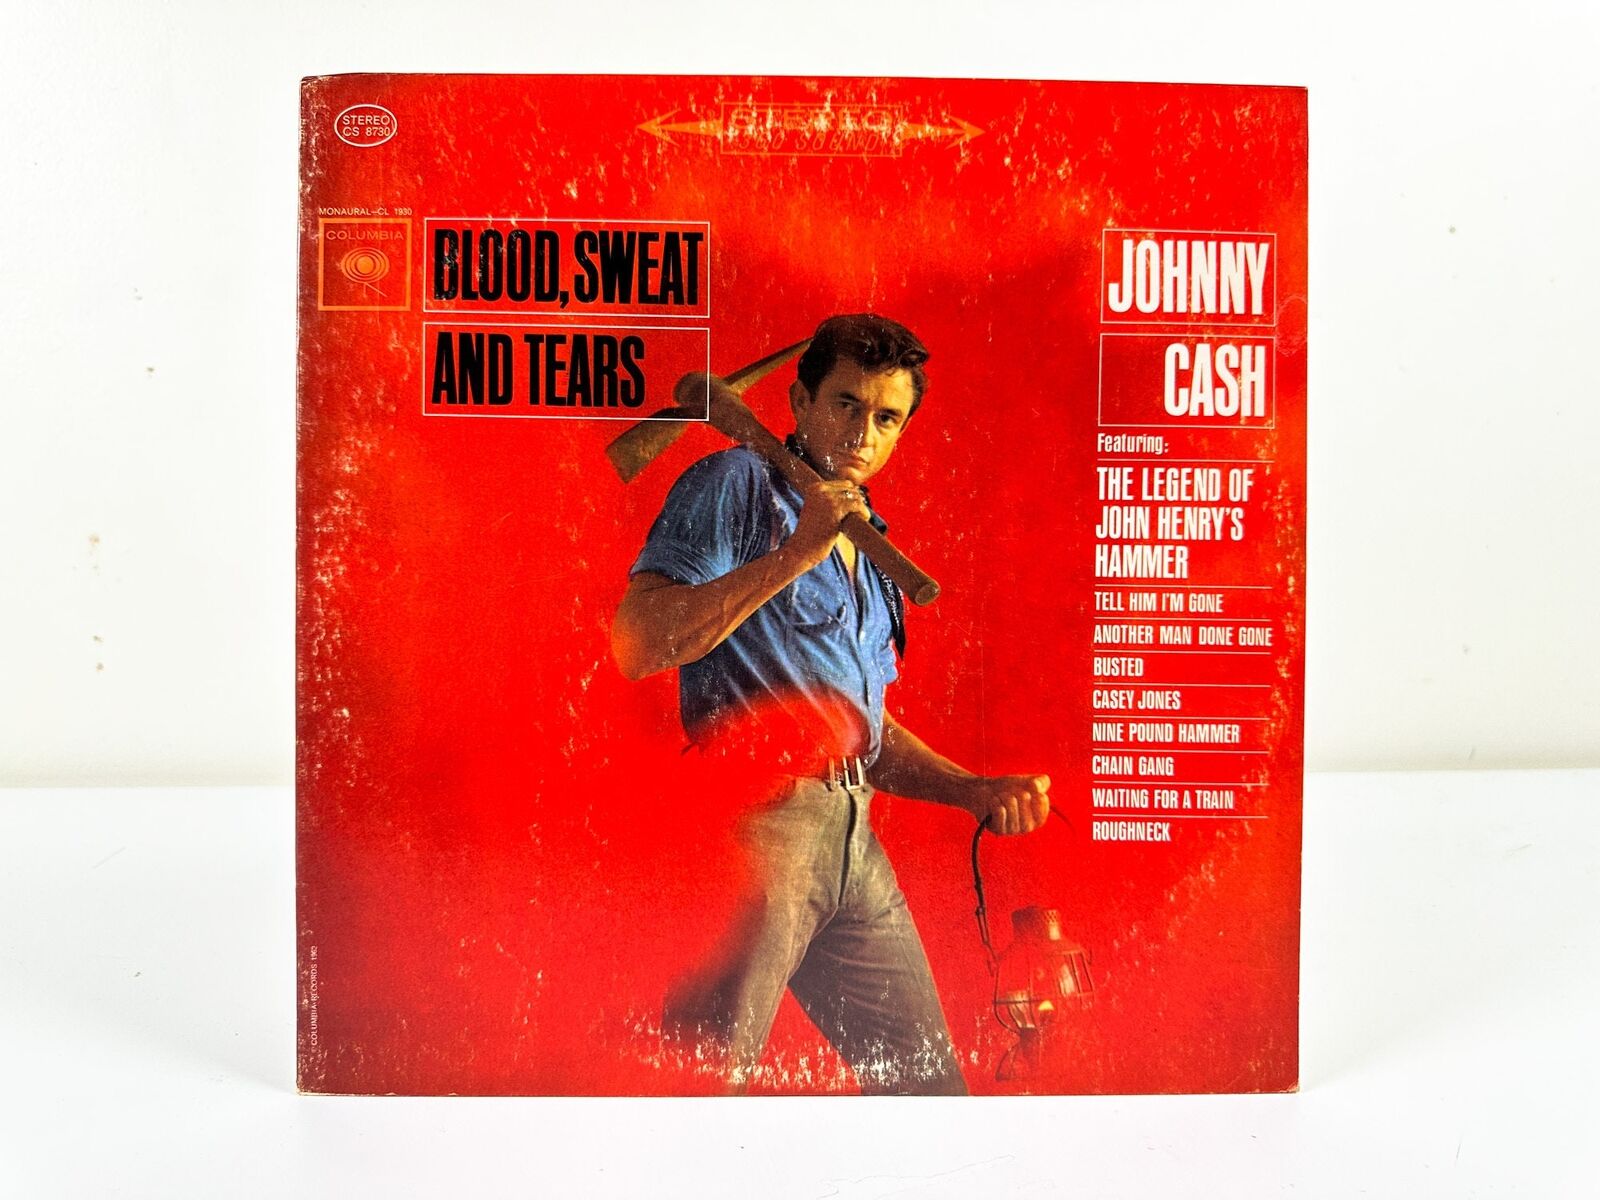 Johnny Cash - Blood, Sweat And Tears - Vinyl LP Record - 1963